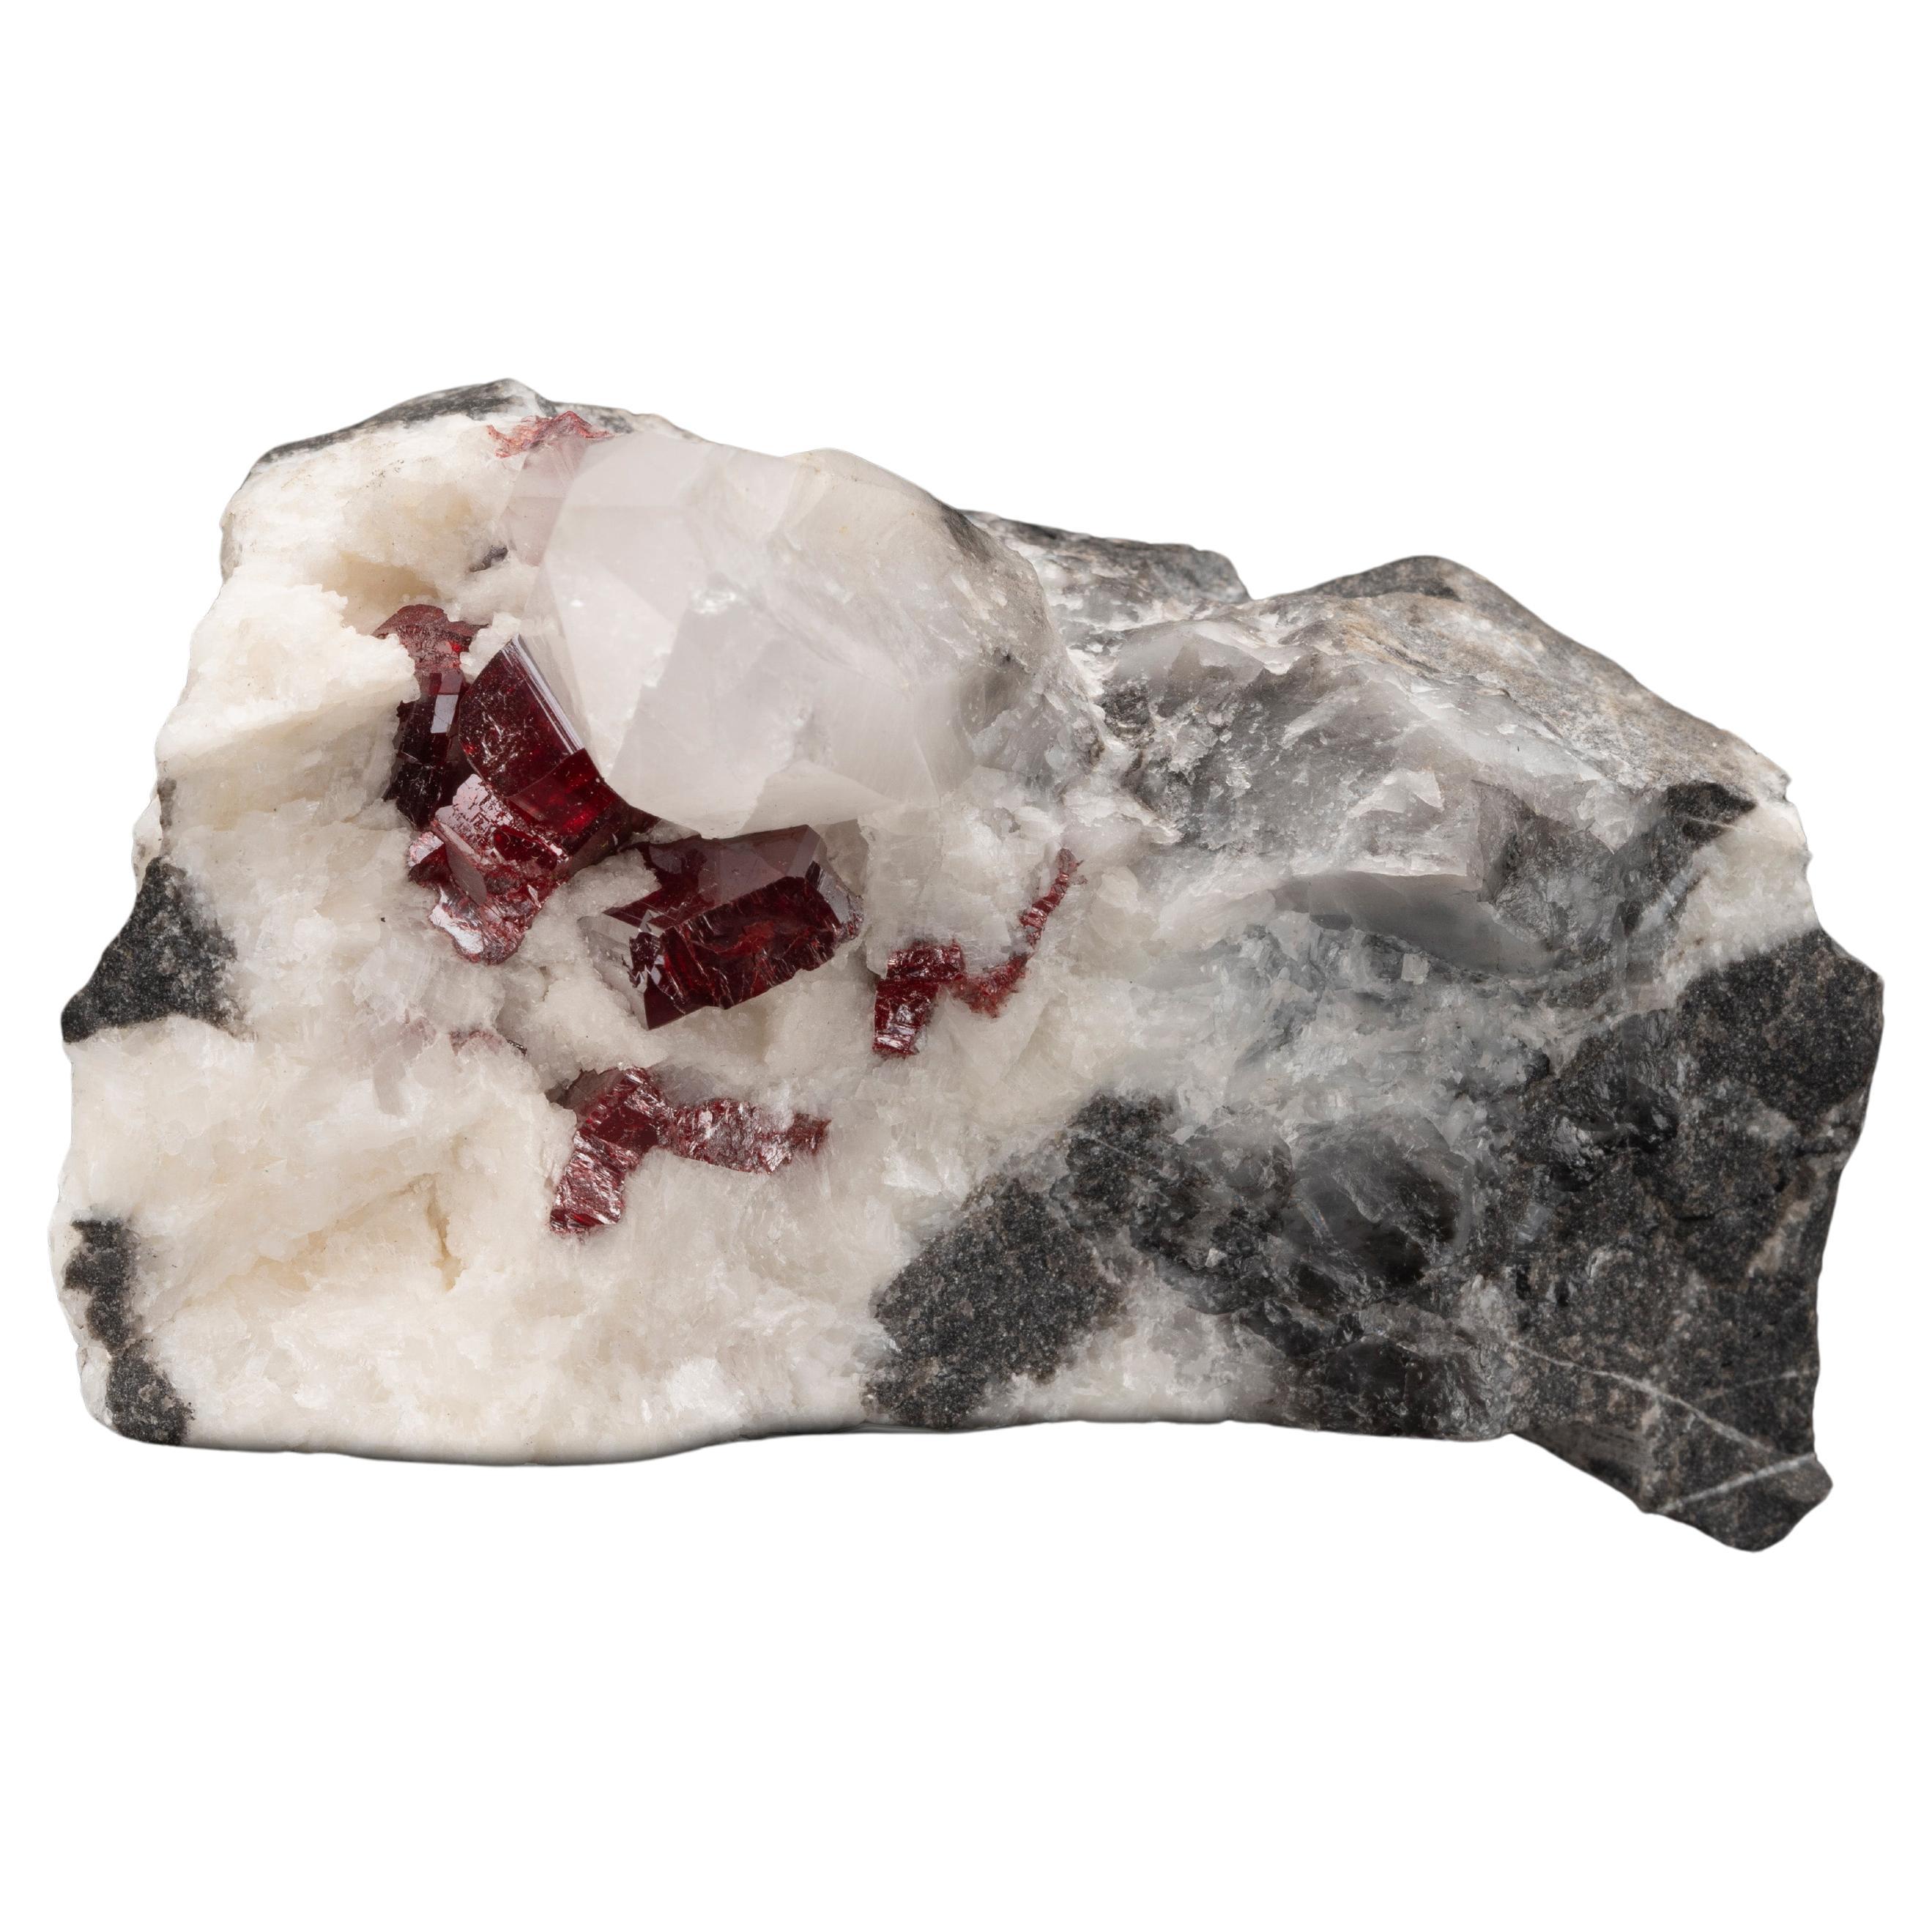 Cinnabar With Quartz From China For Sale